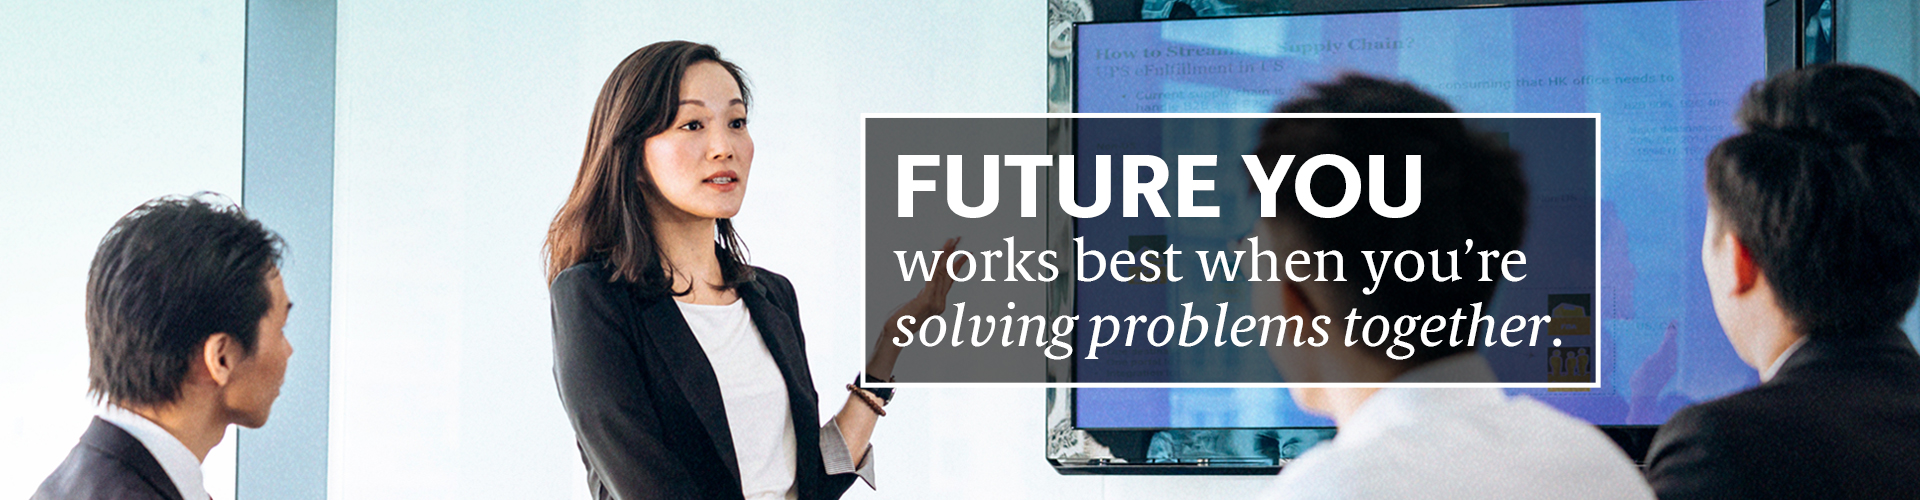 FUTURE YOU works best when you're solving problems together.